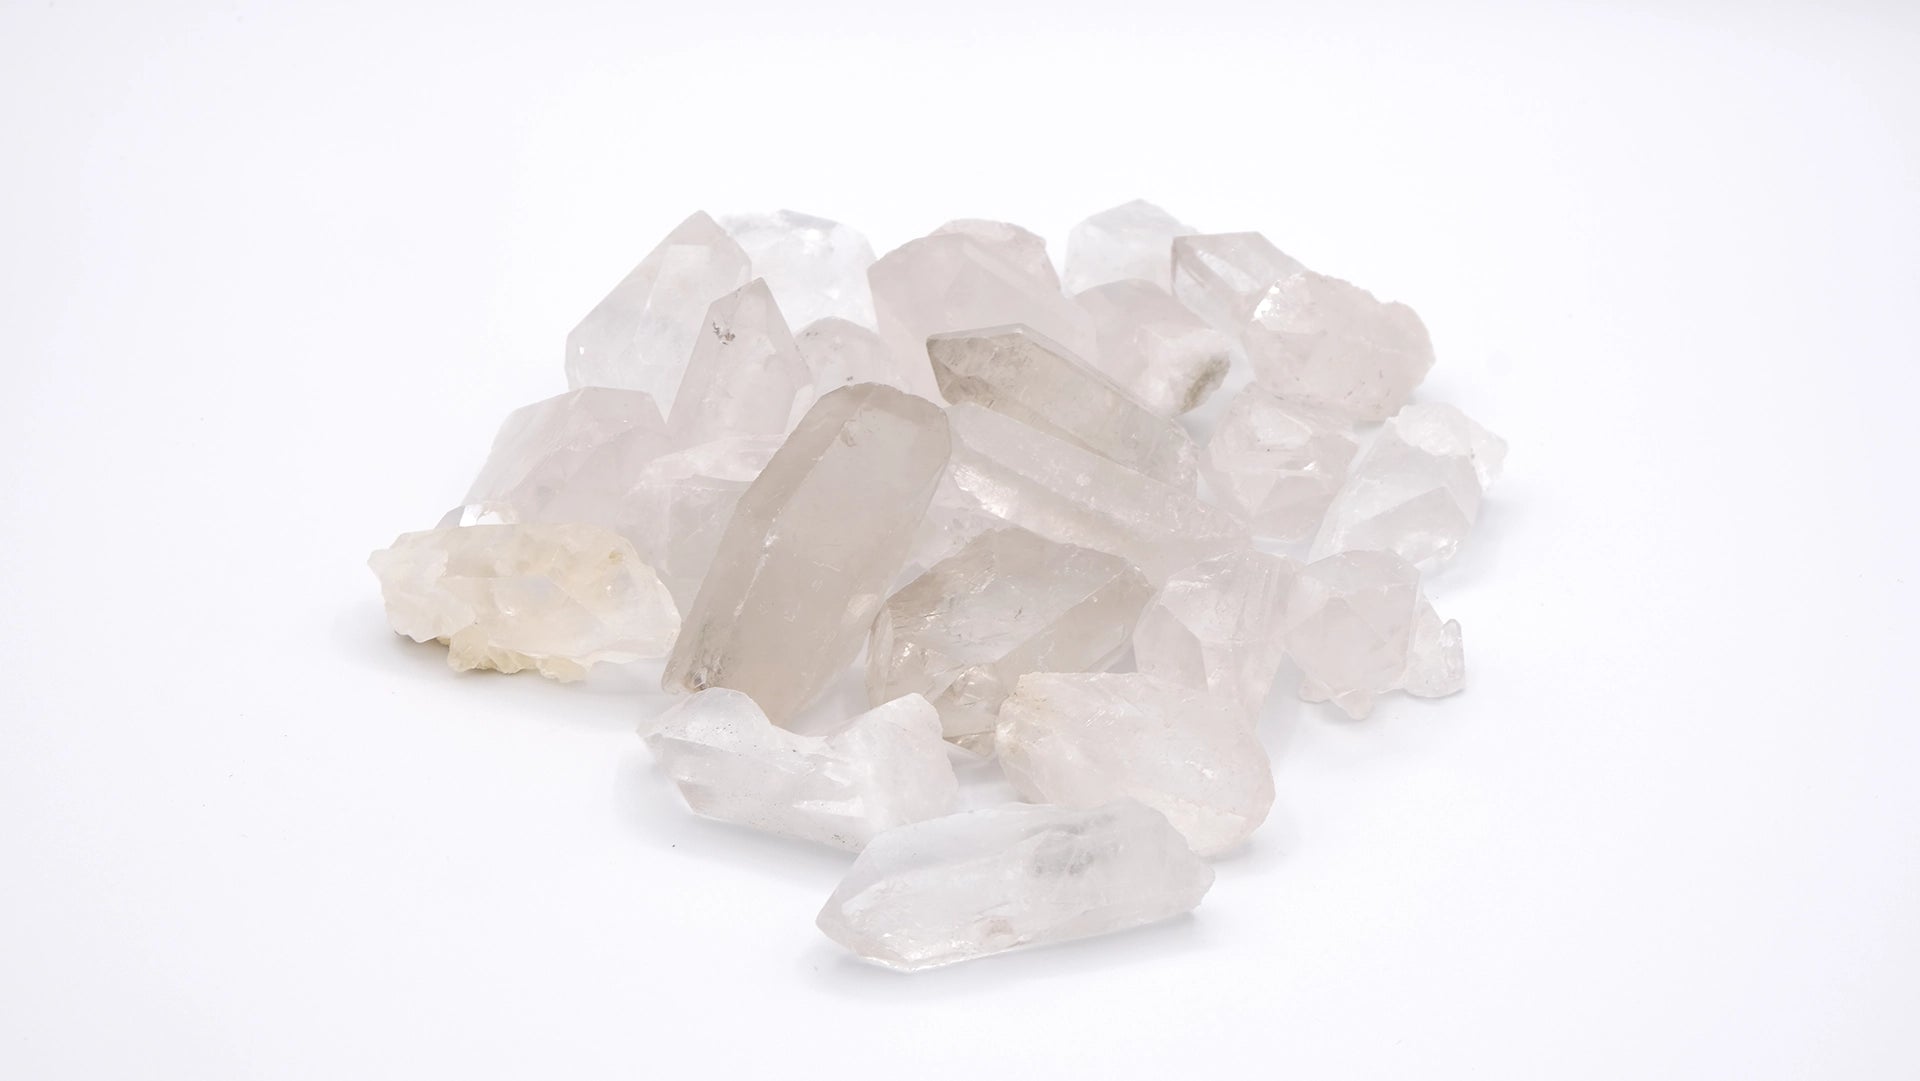 A composition of white quartz tips in prism shape